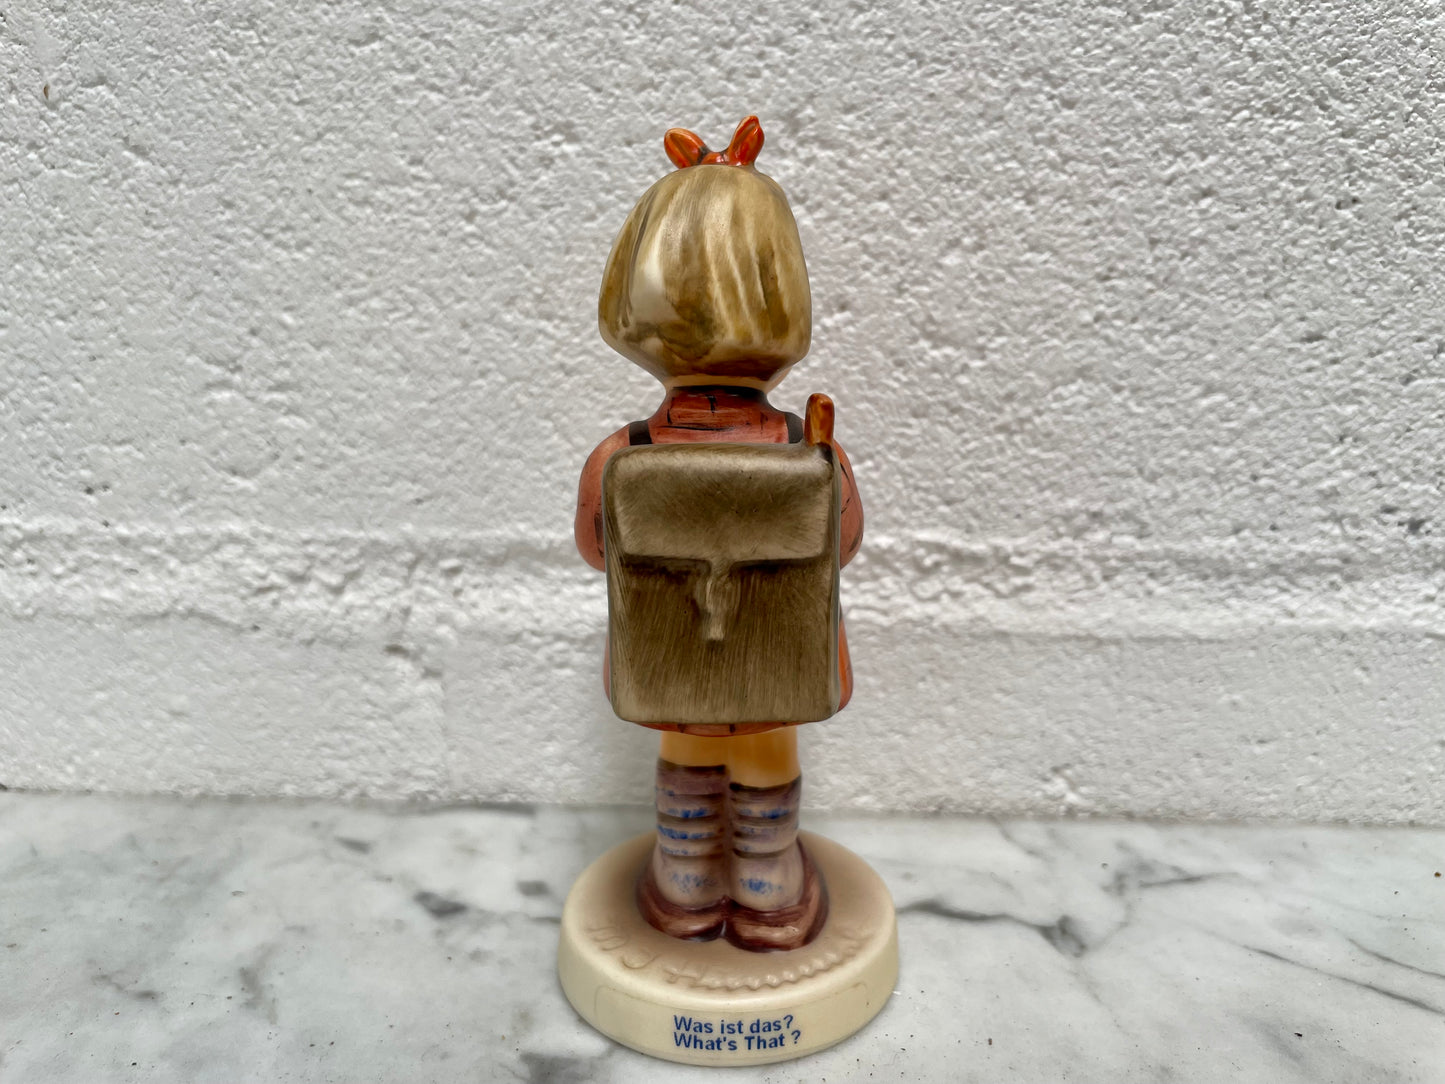 Lovely Vintage Goebel Hummel figurine "What's That" dated 1997. In good original condition. Please see photos as they form part of the description.